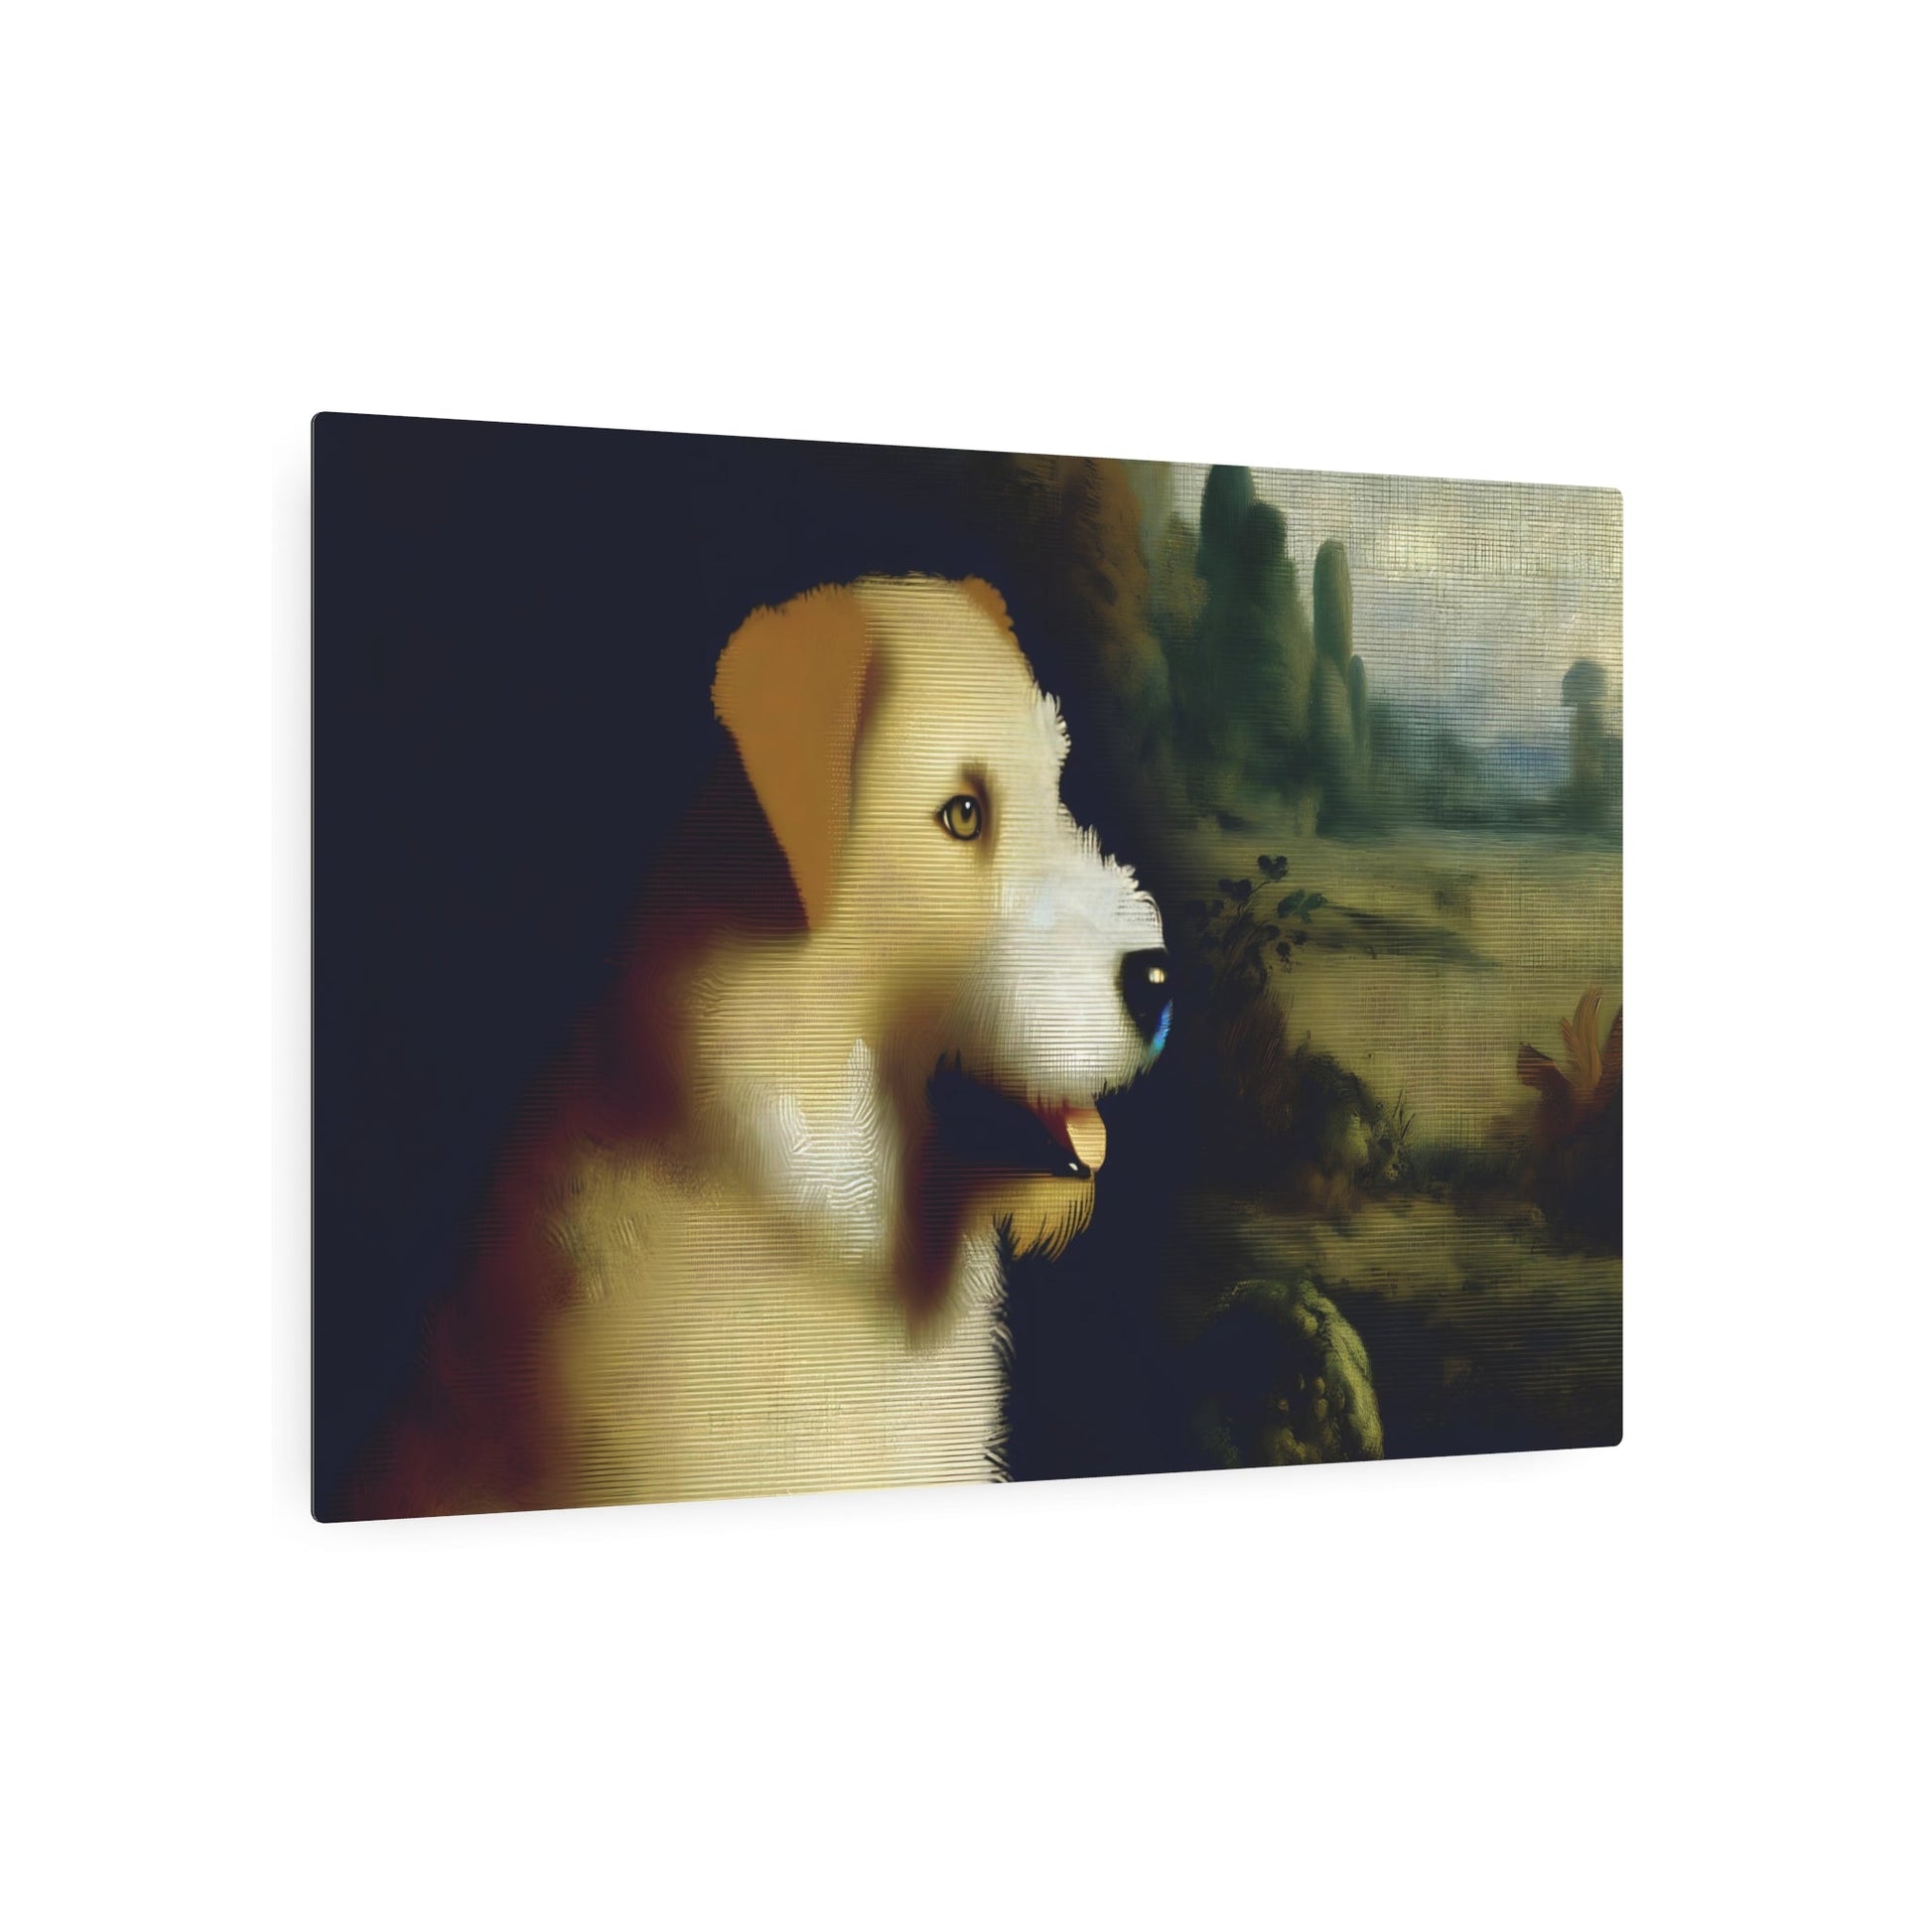 Metal Poster Art | "Neoclassical Art Dog Painting in Detailed Jacques-Louis David Style - Western Neoclassicism Masterpiece" - Metal Poster Art 36″ x 24″ (Horizontal) 0.12''